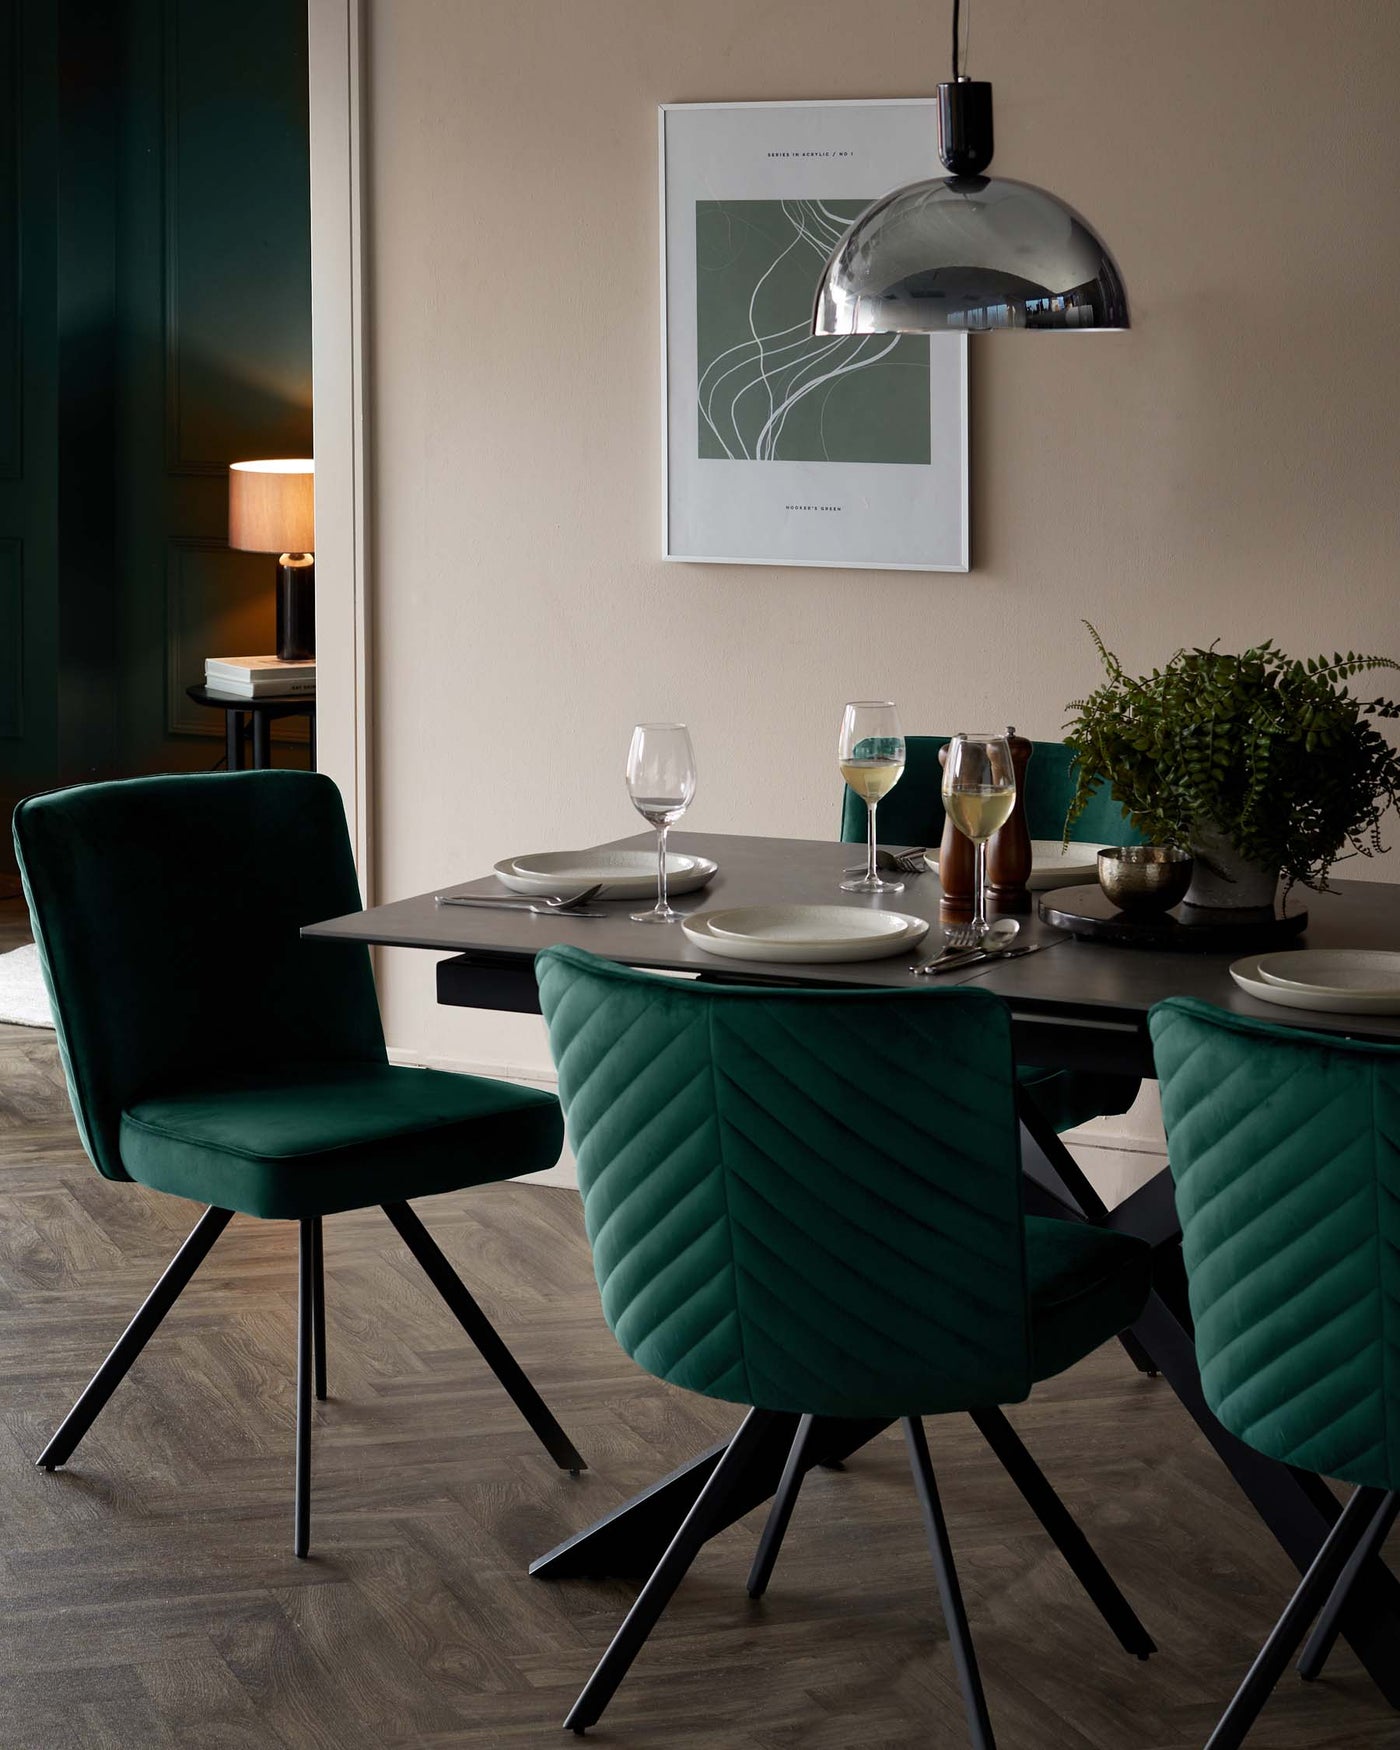 Modern dining room featuring a sleek black rectangular table with matching angular black legs, complemented by four luxurious emerald green upholstered chairs with a distinctive chevron quilting pattern on the backrest. The chairs showcase a plush seat and angled metal legs that mirror the table's design. A contemporary silver dome pendant light hovers above the scene, adding a metallic accent to the sophisticated colour palette.